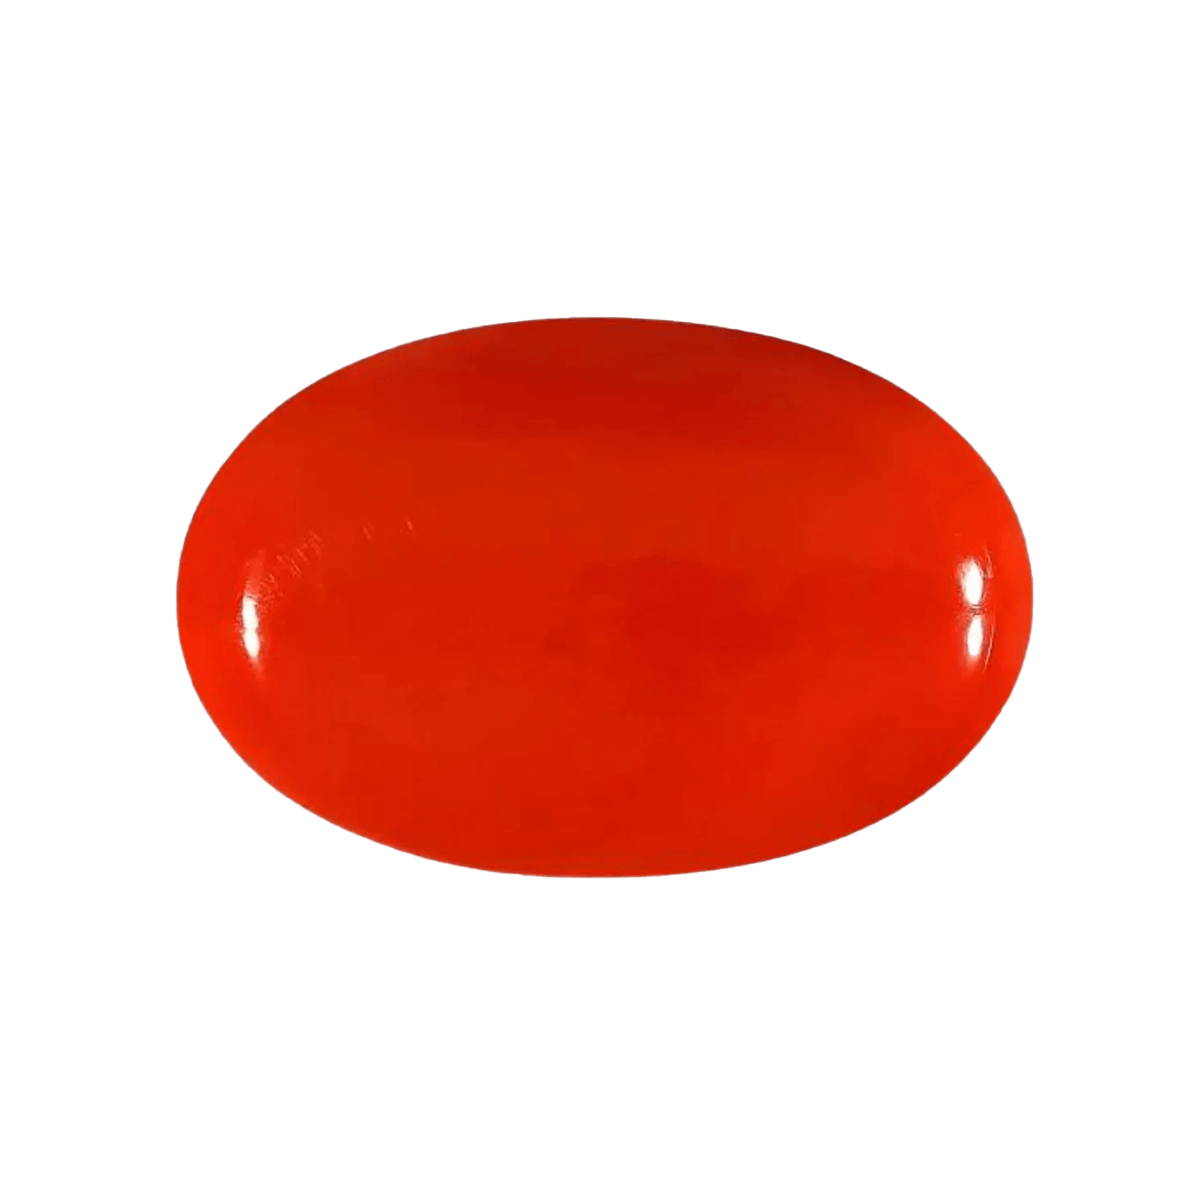 https://saketbhatia.com/wp-content/uploads/2023/06/red-coral.png